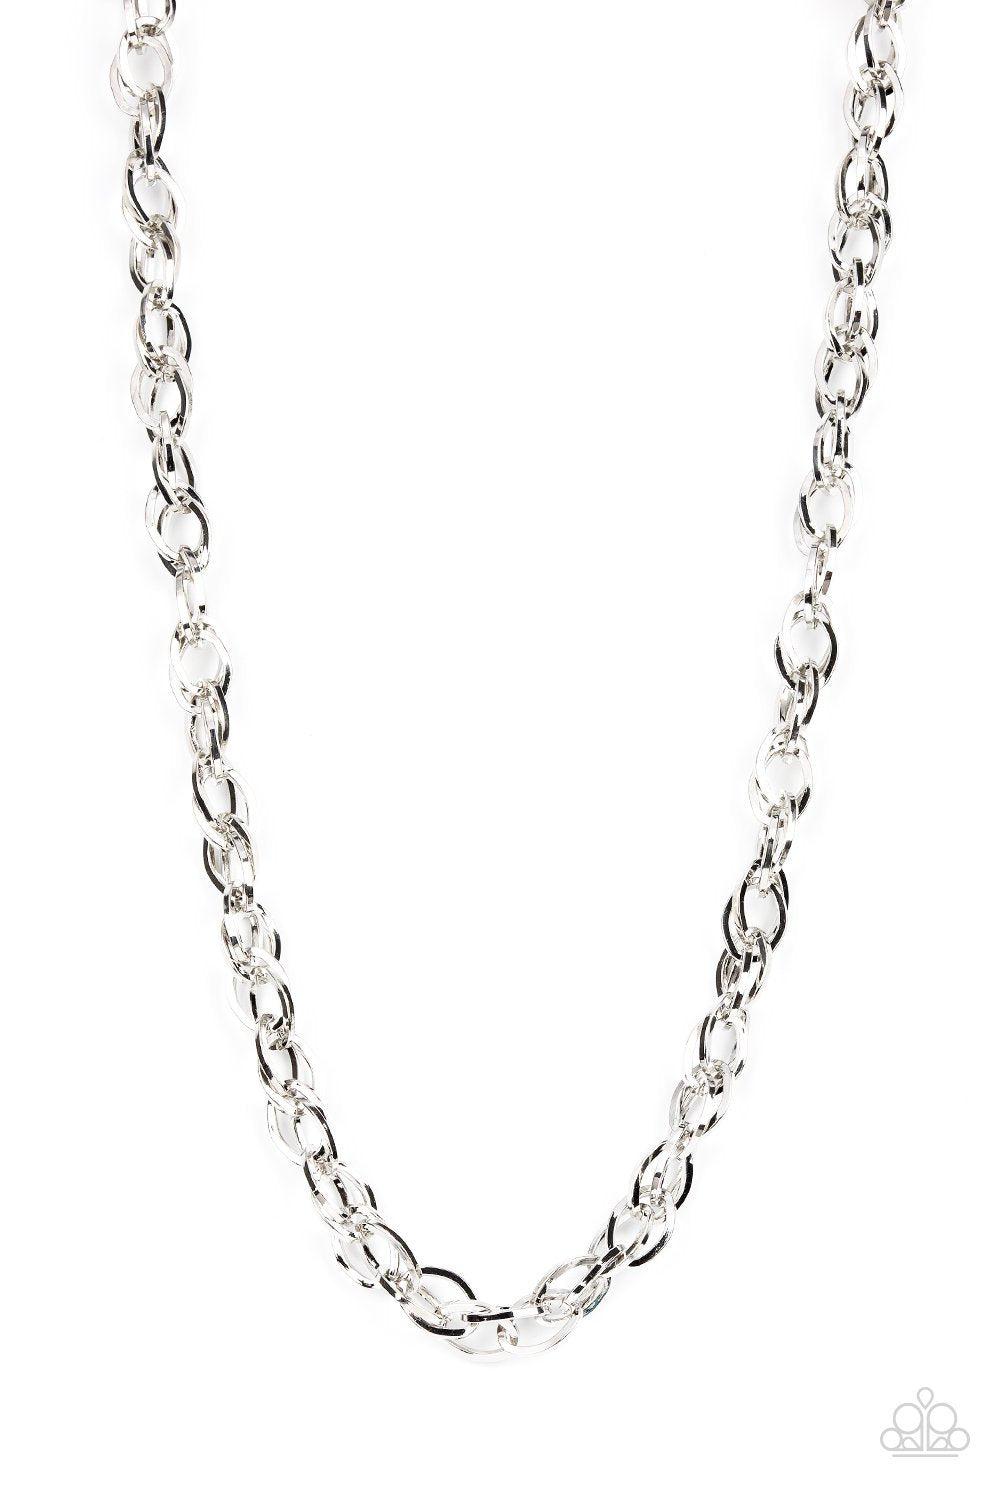 Custom Couture Men's Silver Necklace - Paparazzi Accessories - model -CarasShop.com - $5 Jewelry by Cara Jewels